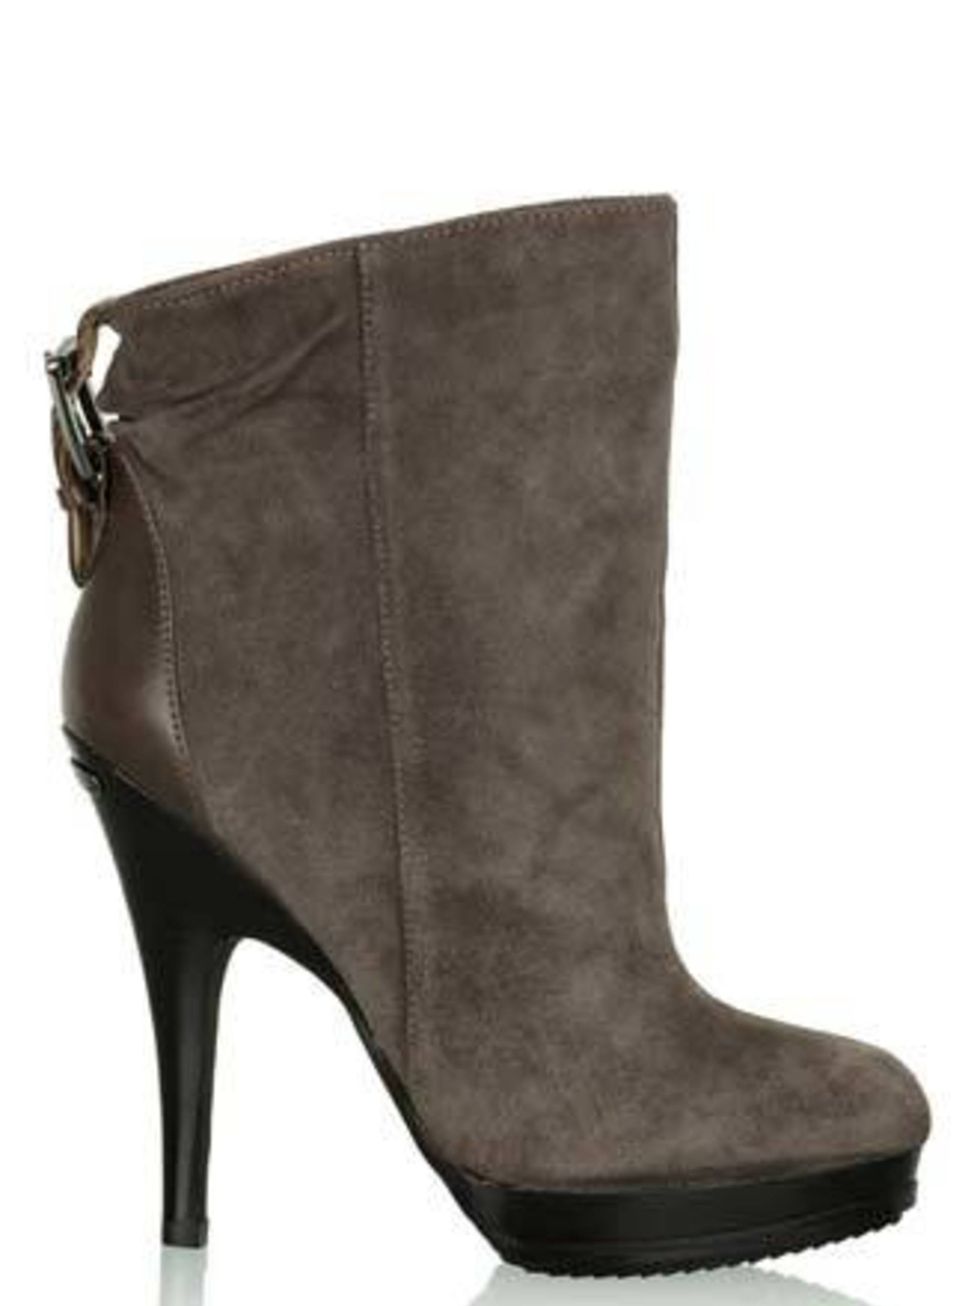 <p>There was a collective ooh when we spotted these boots. Pair with jeans and a chunky knit to get that casual, luxe look just right.</p><p>Suede Boots, £190 by Michael by Michael Kors at <a href="http://www.my-wardrobe.com/michael-by-michael-kors/gr